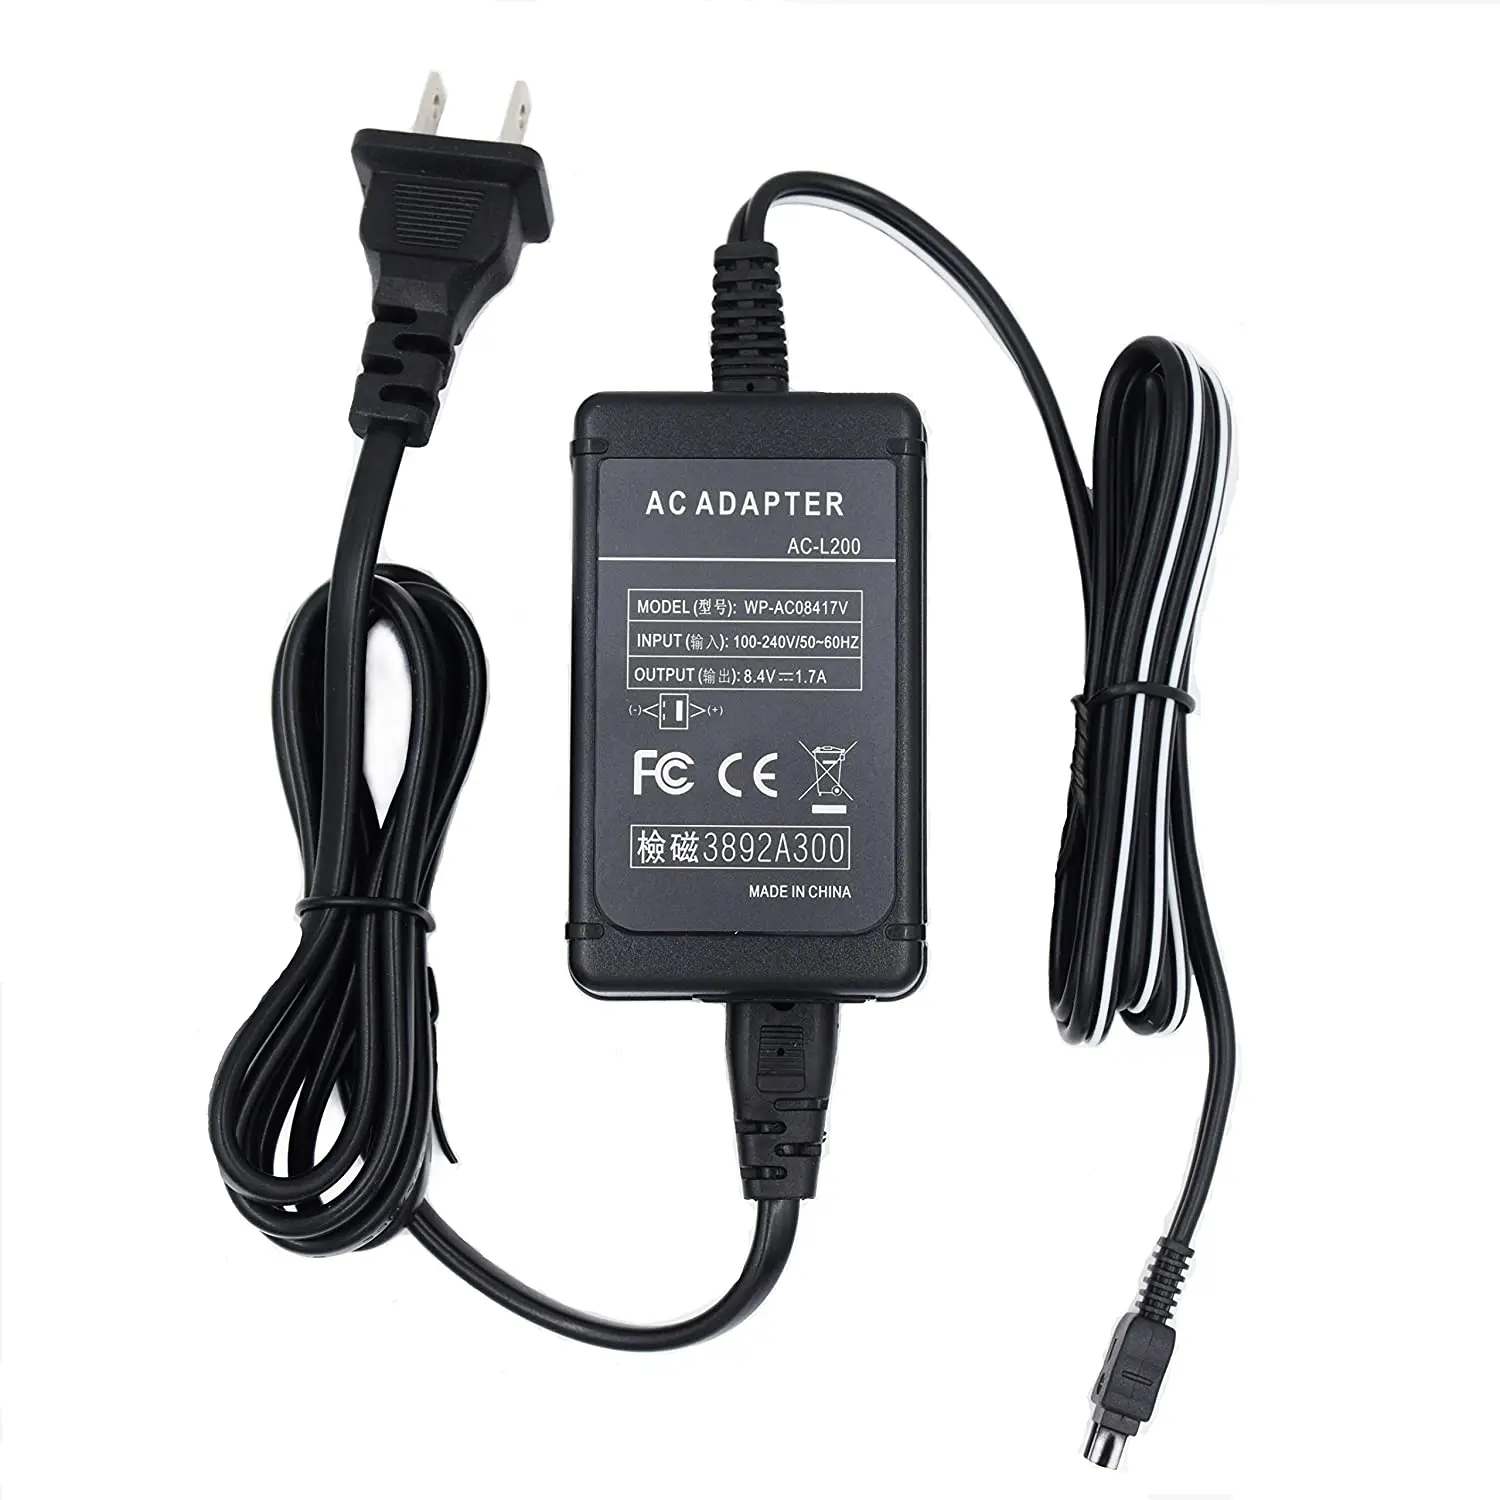 Ac-l200 Ac Power Adapter For Sony Handycam Dcr-sx40 Sx41 Sx45 Sx60 Sx65,Dcr-dvd7  Dvd105 Dvd108 Dvd203 Dvd308 Dvd610 Camcorder - Buy Ac-l200 Ac Power  Adapter,Adapter Power Supply,Desktop Power Supply Product on Alibaba.com